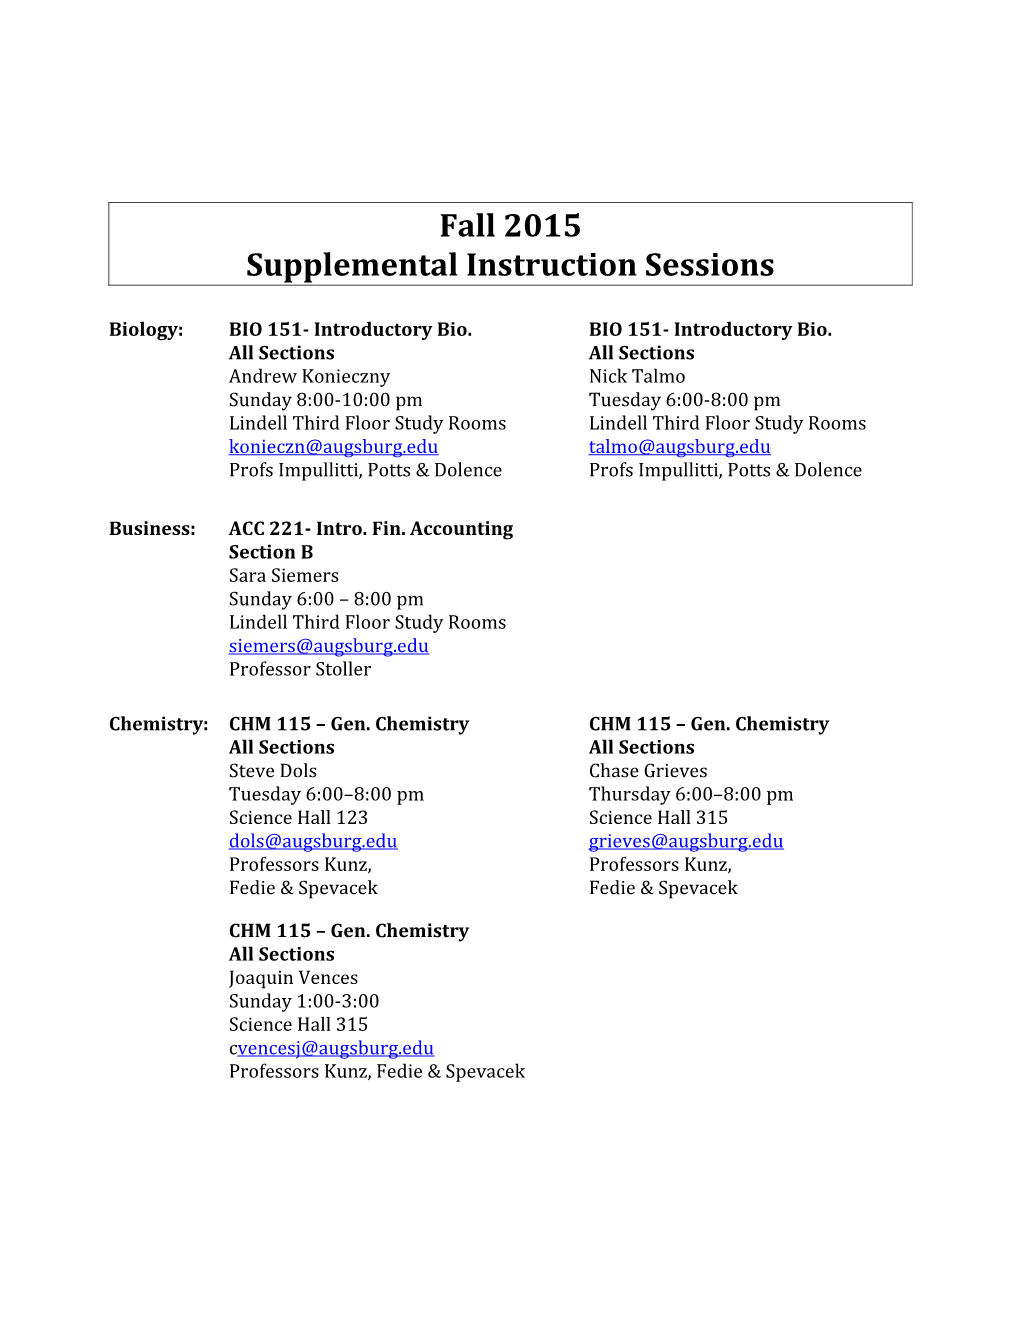 Supplemental Instruction Sessions